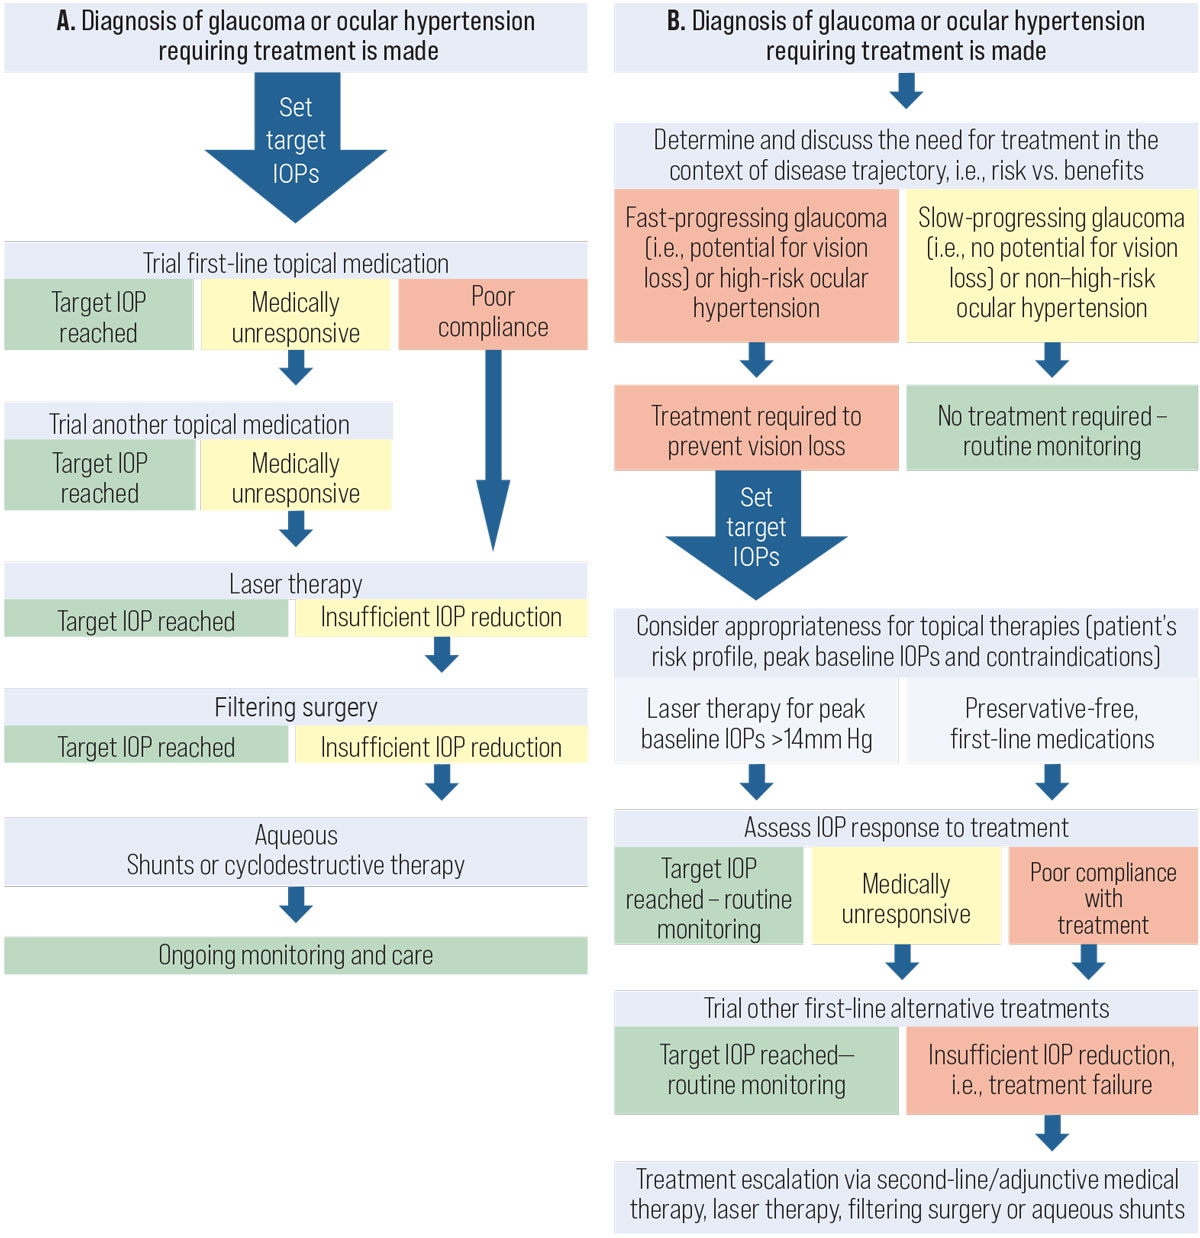 Fig. 2. (A) The current framework used in the management of patients with glaucoma. (B) Our new proposed framework for the management of patients with glaucoma. 